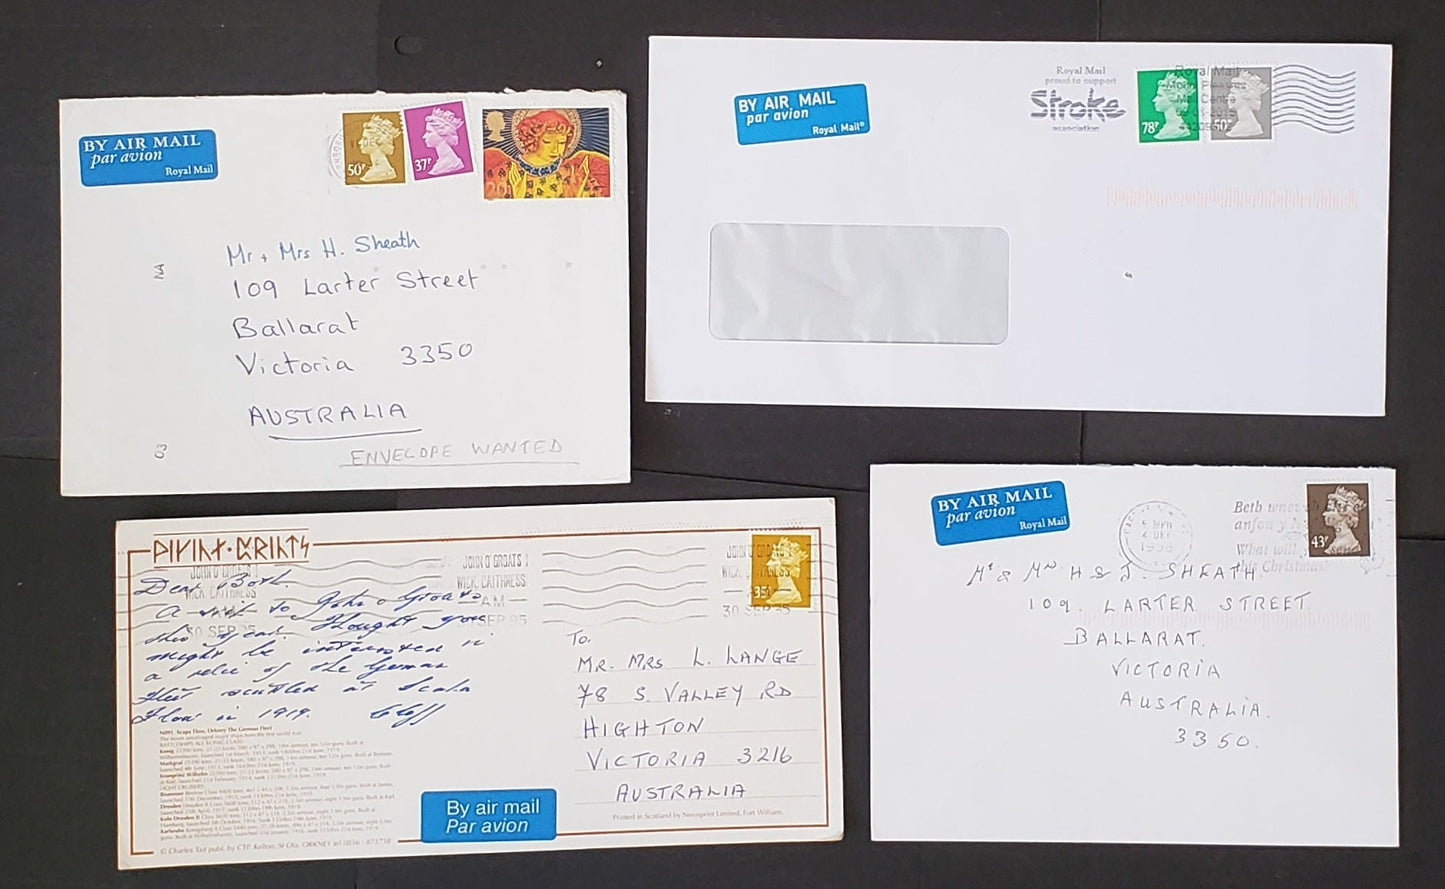 Lot 356 Great Britain 1995-2015 Decimal Machin Covers, A Selection of 4 Different, With Elliptical Perf Machins, Mostly Values Between 35p and 78p, All Sent to Australia, Net. Est. $10